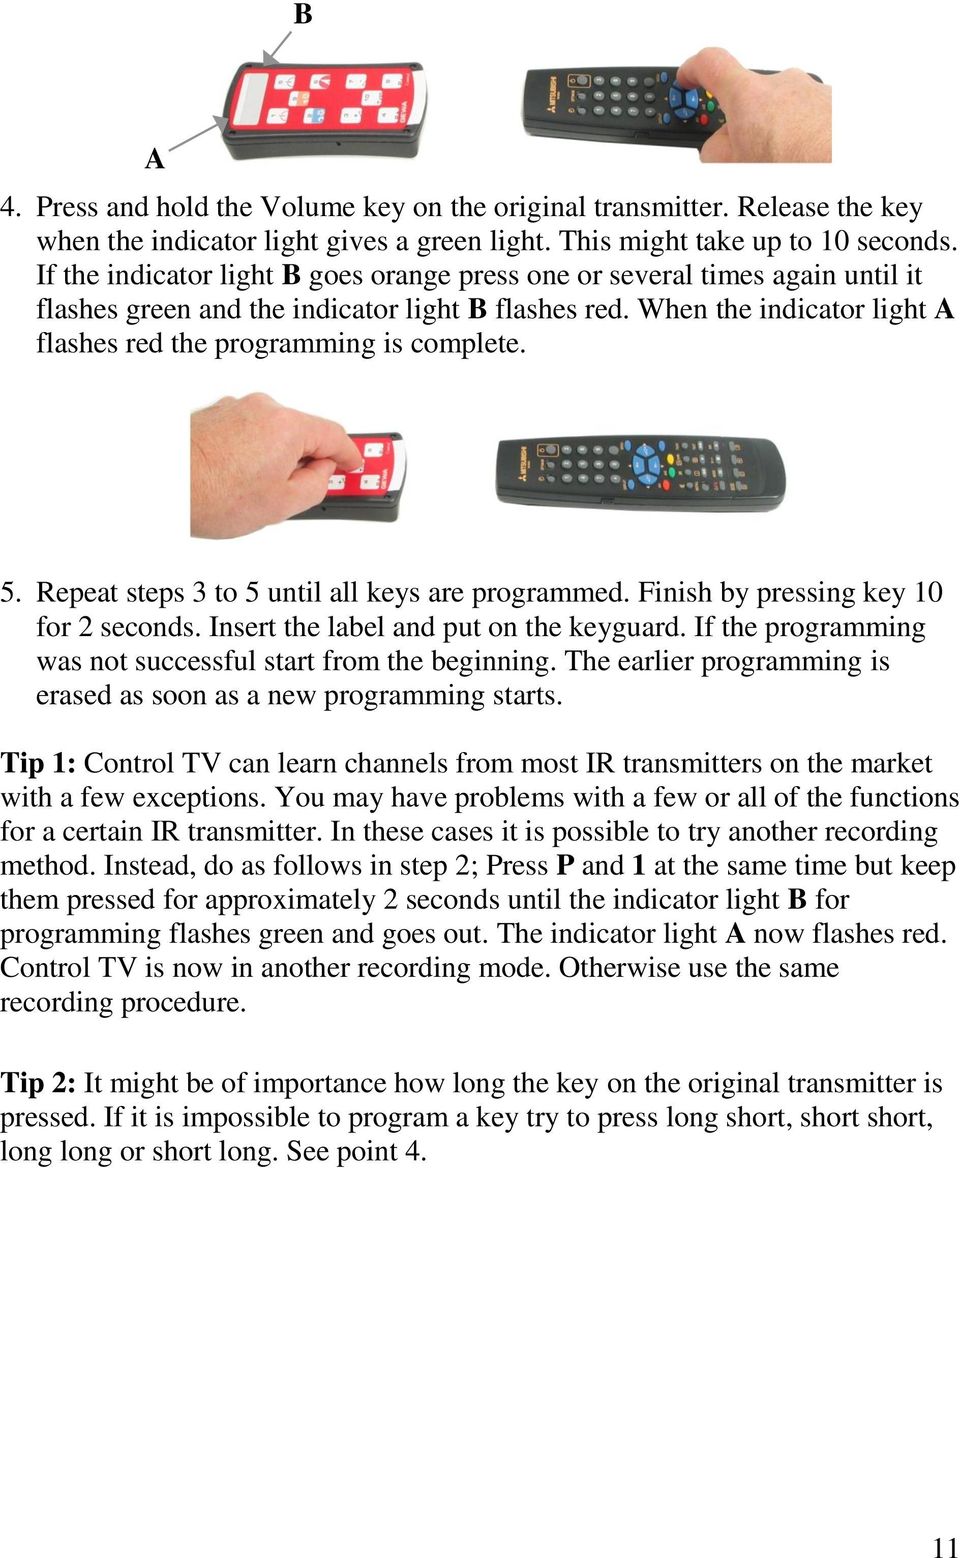 5. Repeat steps 3 to 5 until all keys are programmed. Finish by pressing key 10 for 2 seconds. Insert the label and put on the keyguard. If the programming was not successful start from the beginning.